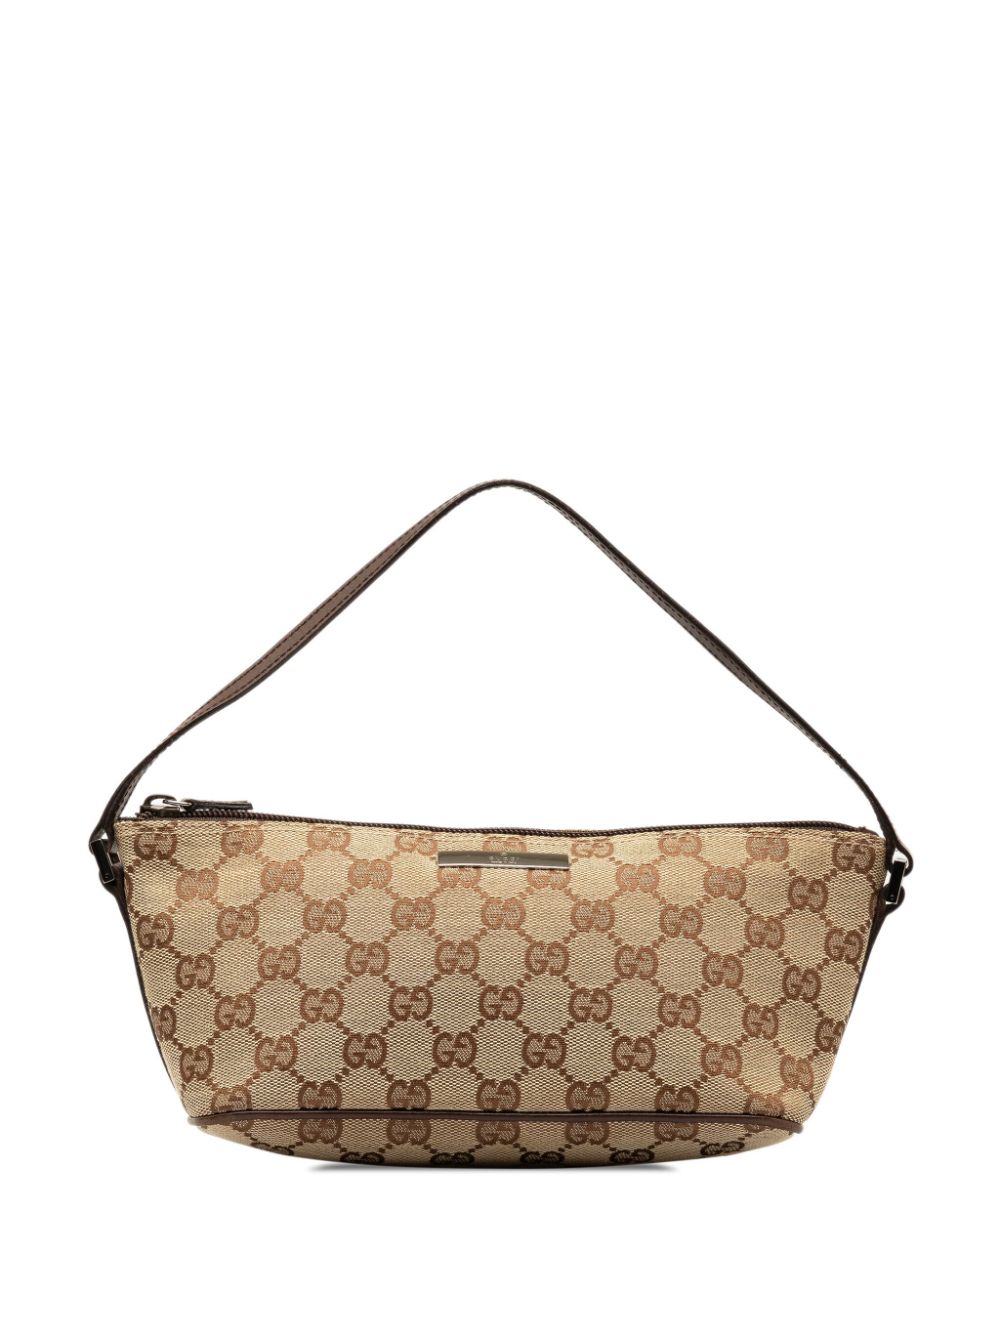 Pre-owned Gucci 2000-2015 Gg Canvas Boat Shoulder Bag In Brown